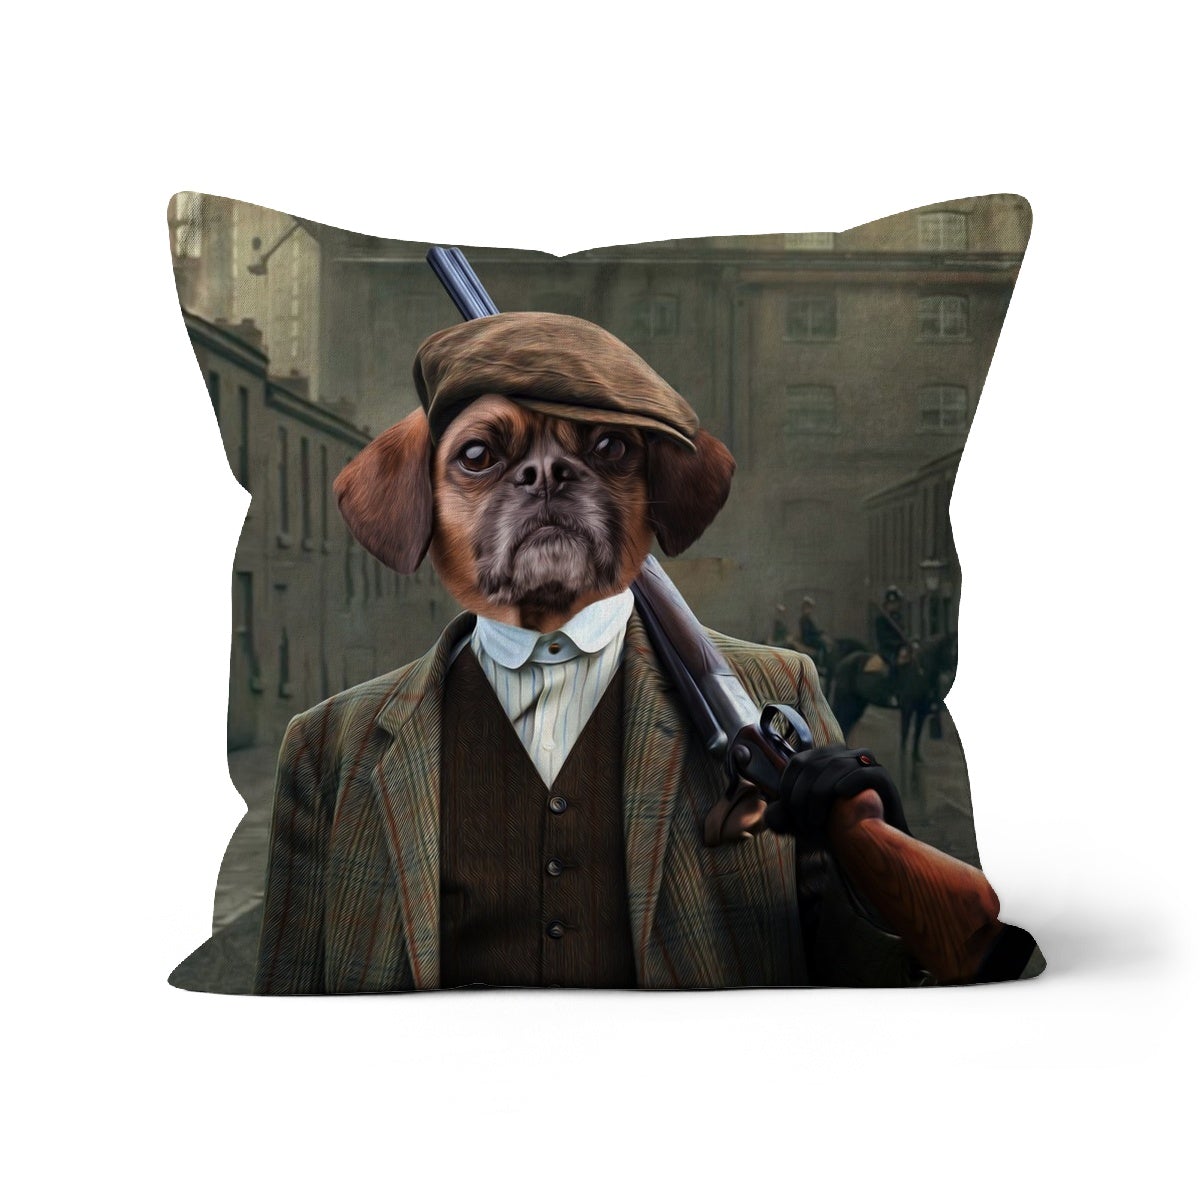 The Thug (Peaky Blinders Inspired): Custom Pet Cushion - Paw & Glory - #pet portraits# - #dog portraits# - #pet portraits uk#pawandglory, pet art pillow,dog pillow custom, custom pet pillows, pup pillows, pillow with dogs face, dog pillow cases